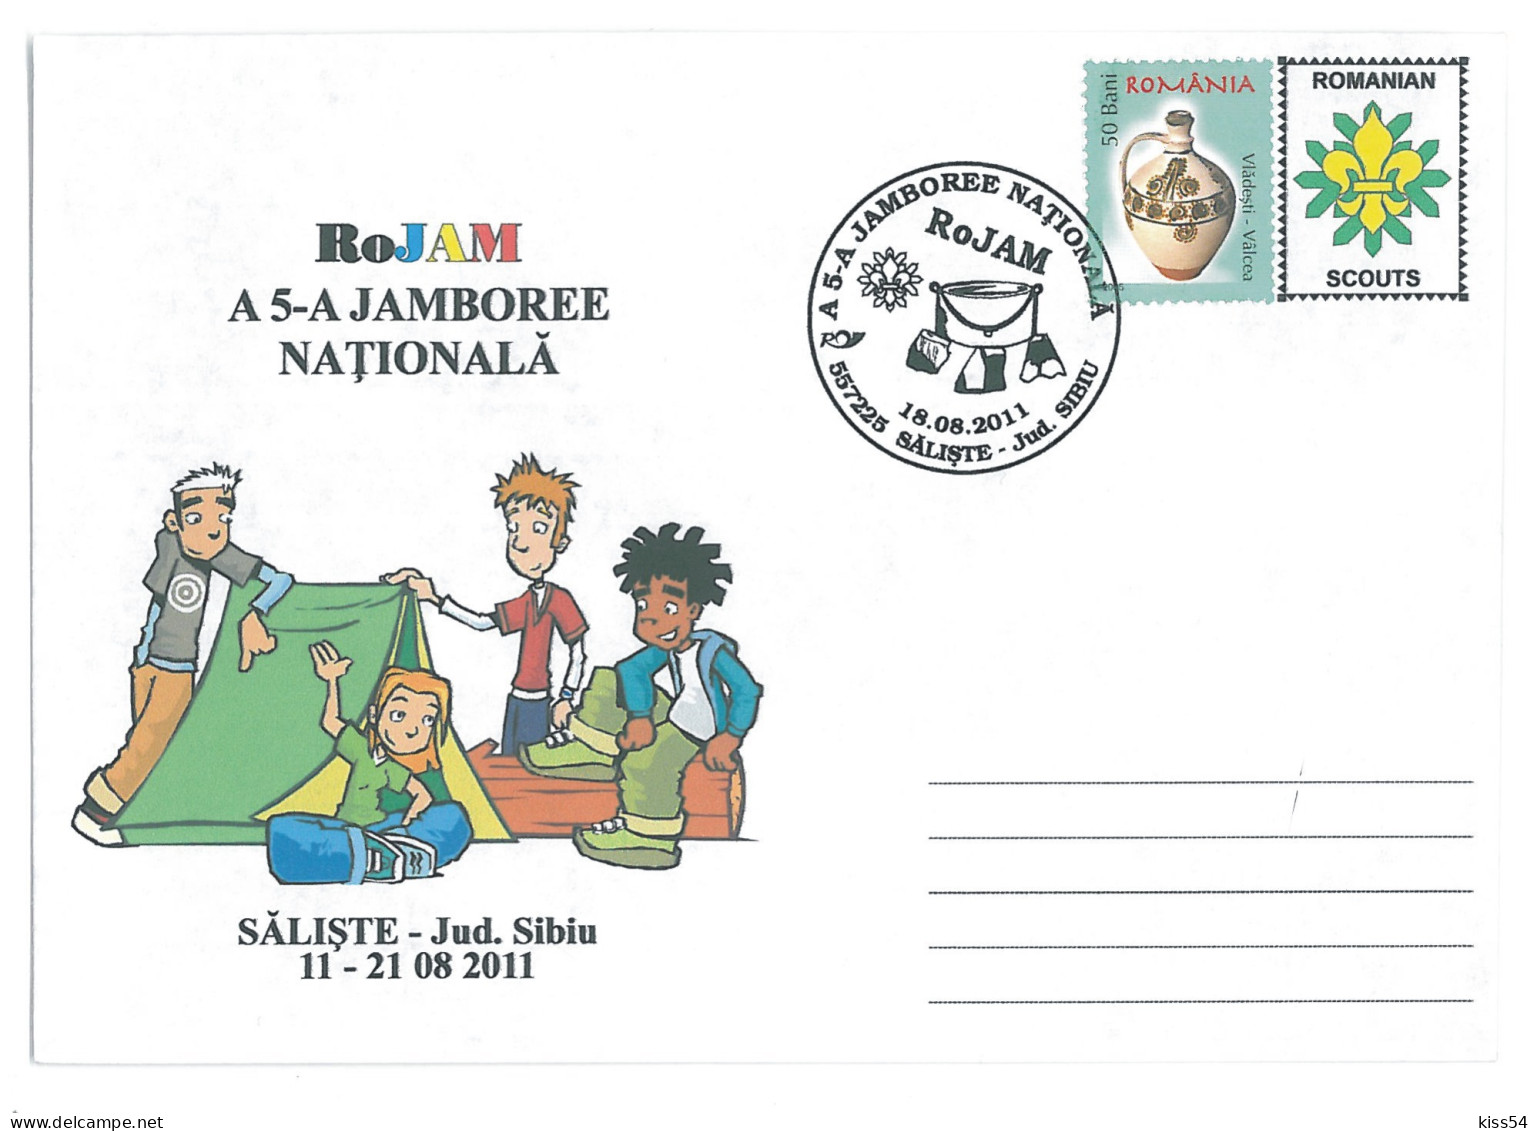 SC 42 - 1297 Scout ROMANIA, National Jamboree - Cover - Used - 2011 - Covers & Documents